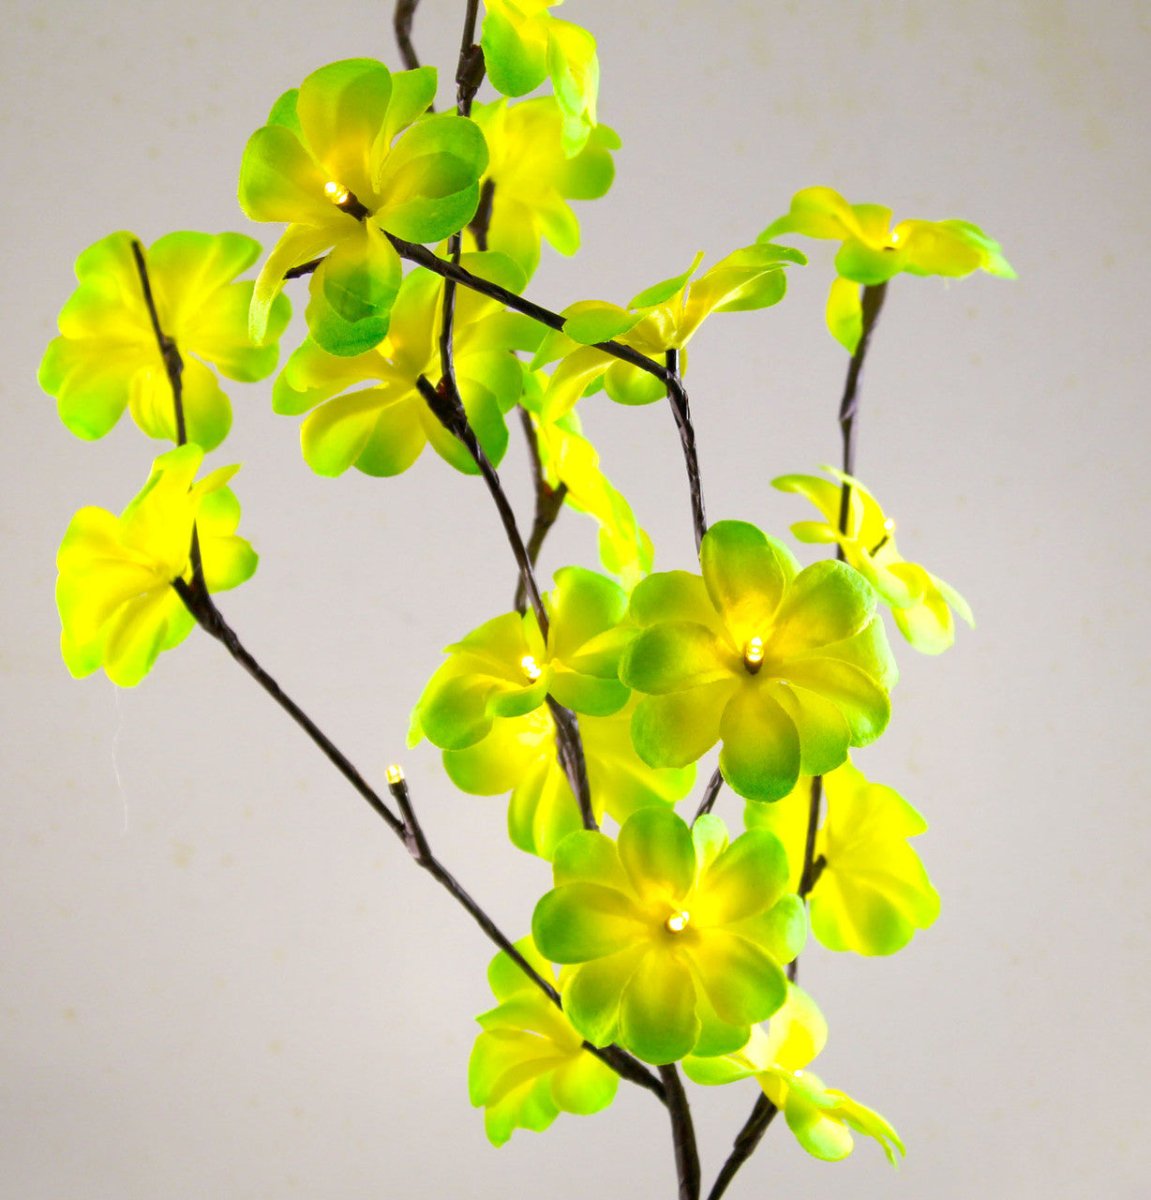 Set of 20 LED Green Frangipani Tree Branch Fairy Lights - Perfect for Wedding, Party, Table Decoration - Outdoorium